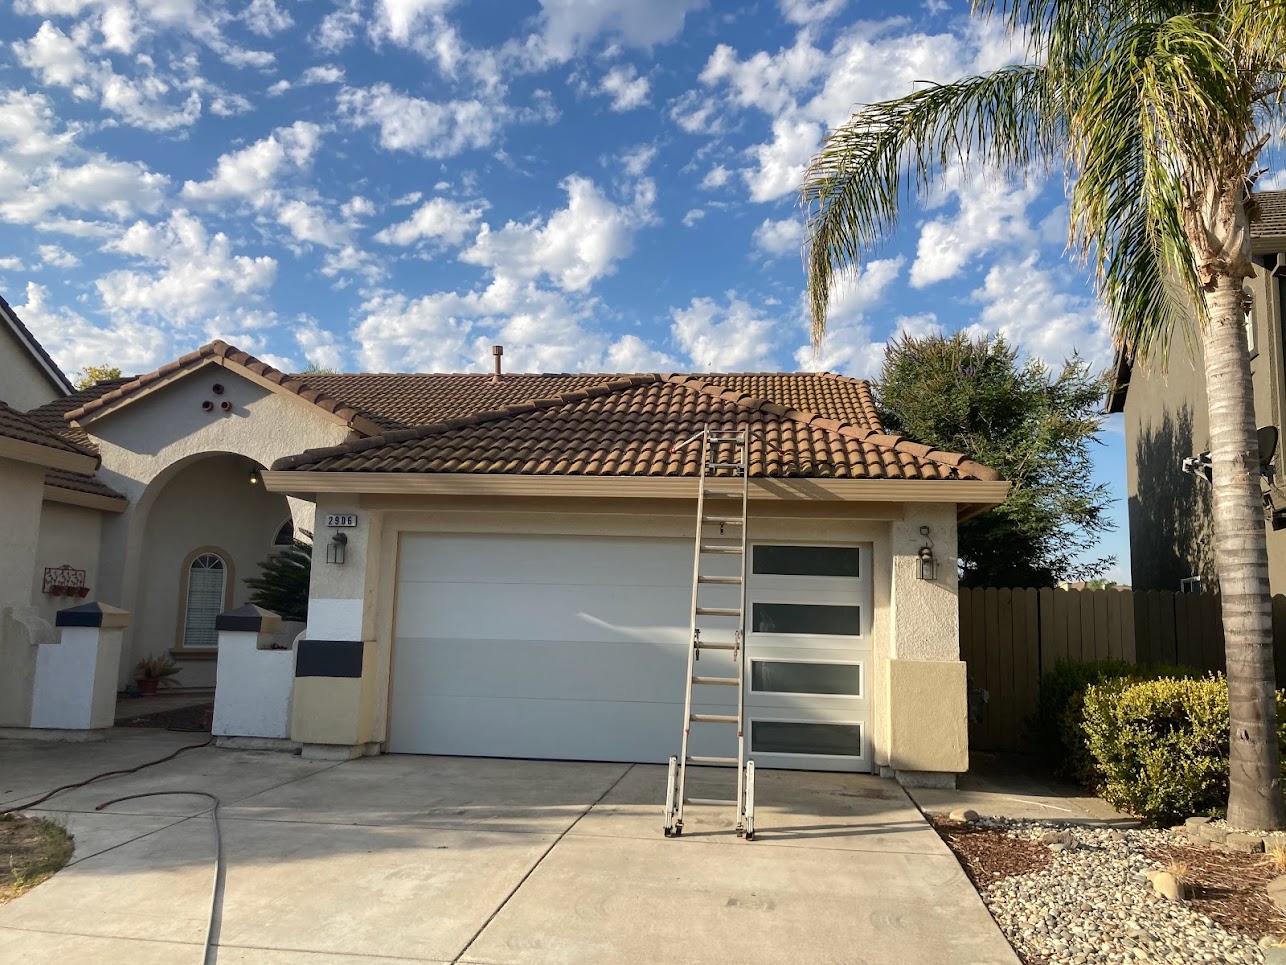 Tile Roof Cleaning in Natomas, CA 